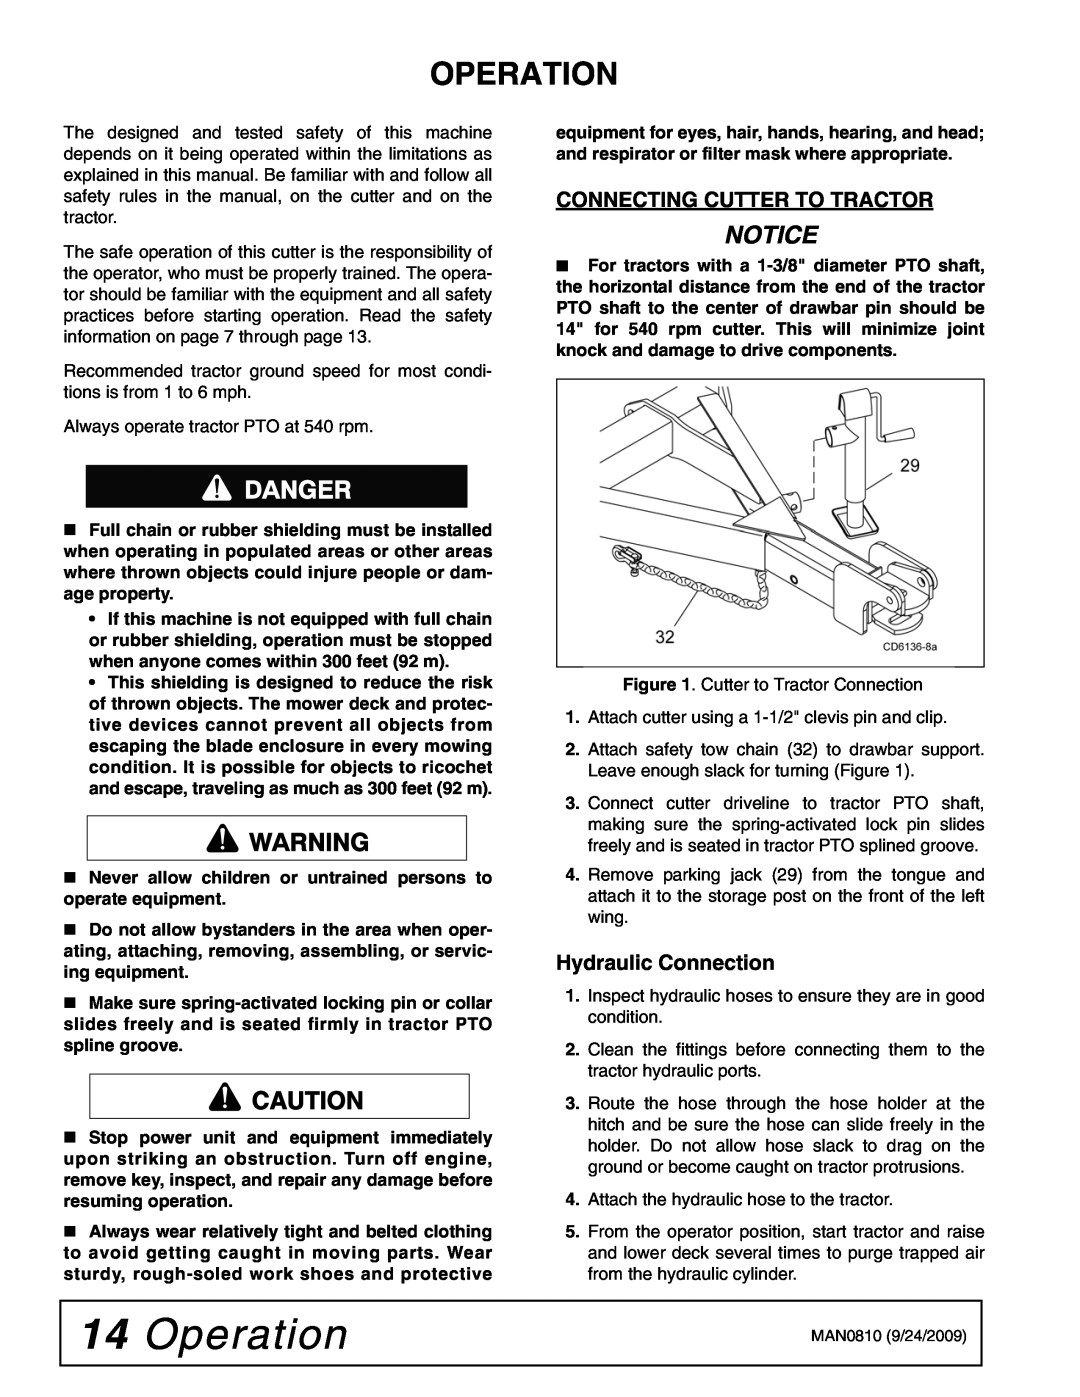 Woods Equipment BW15LH manual Operation, Notice 